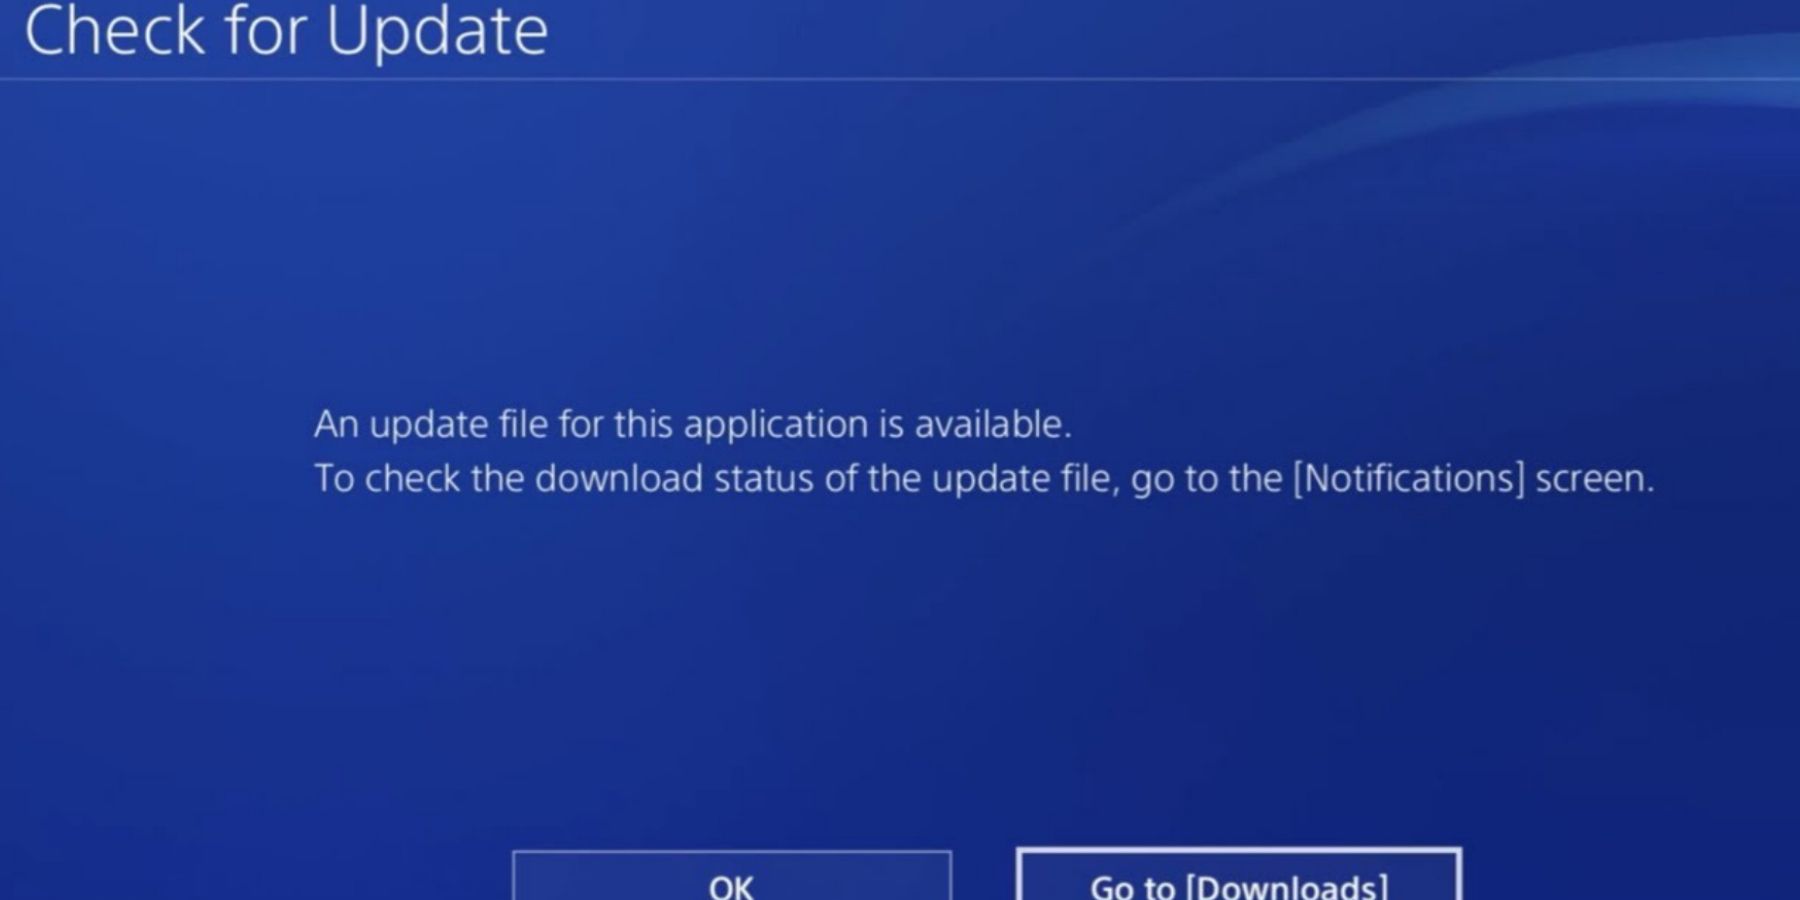 ps4-check-for-update-screen-1